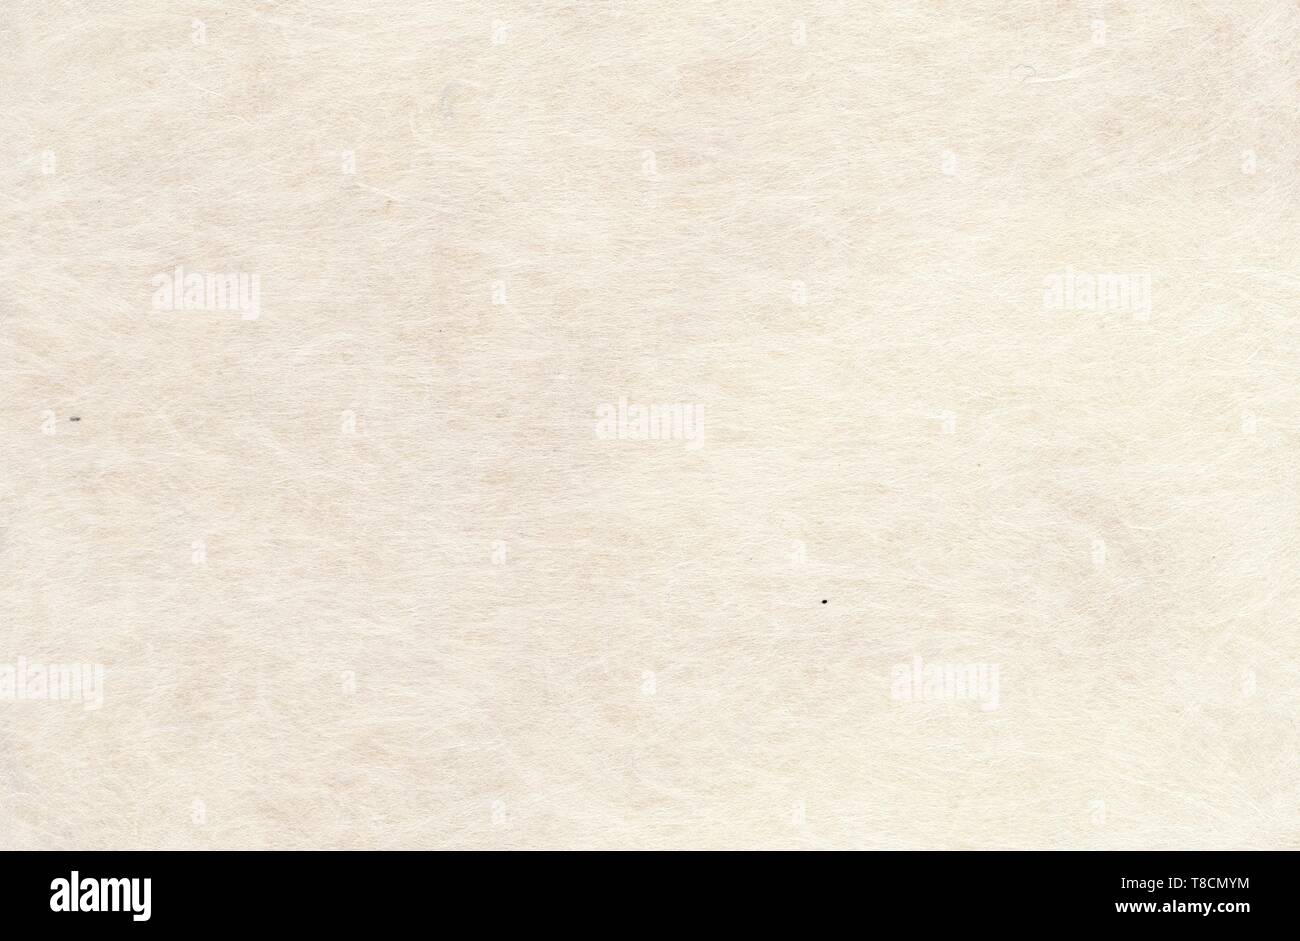 Hand Made Japanese Traditional Paper Washi Texture Stock Photo - Download  Image Now - iStock